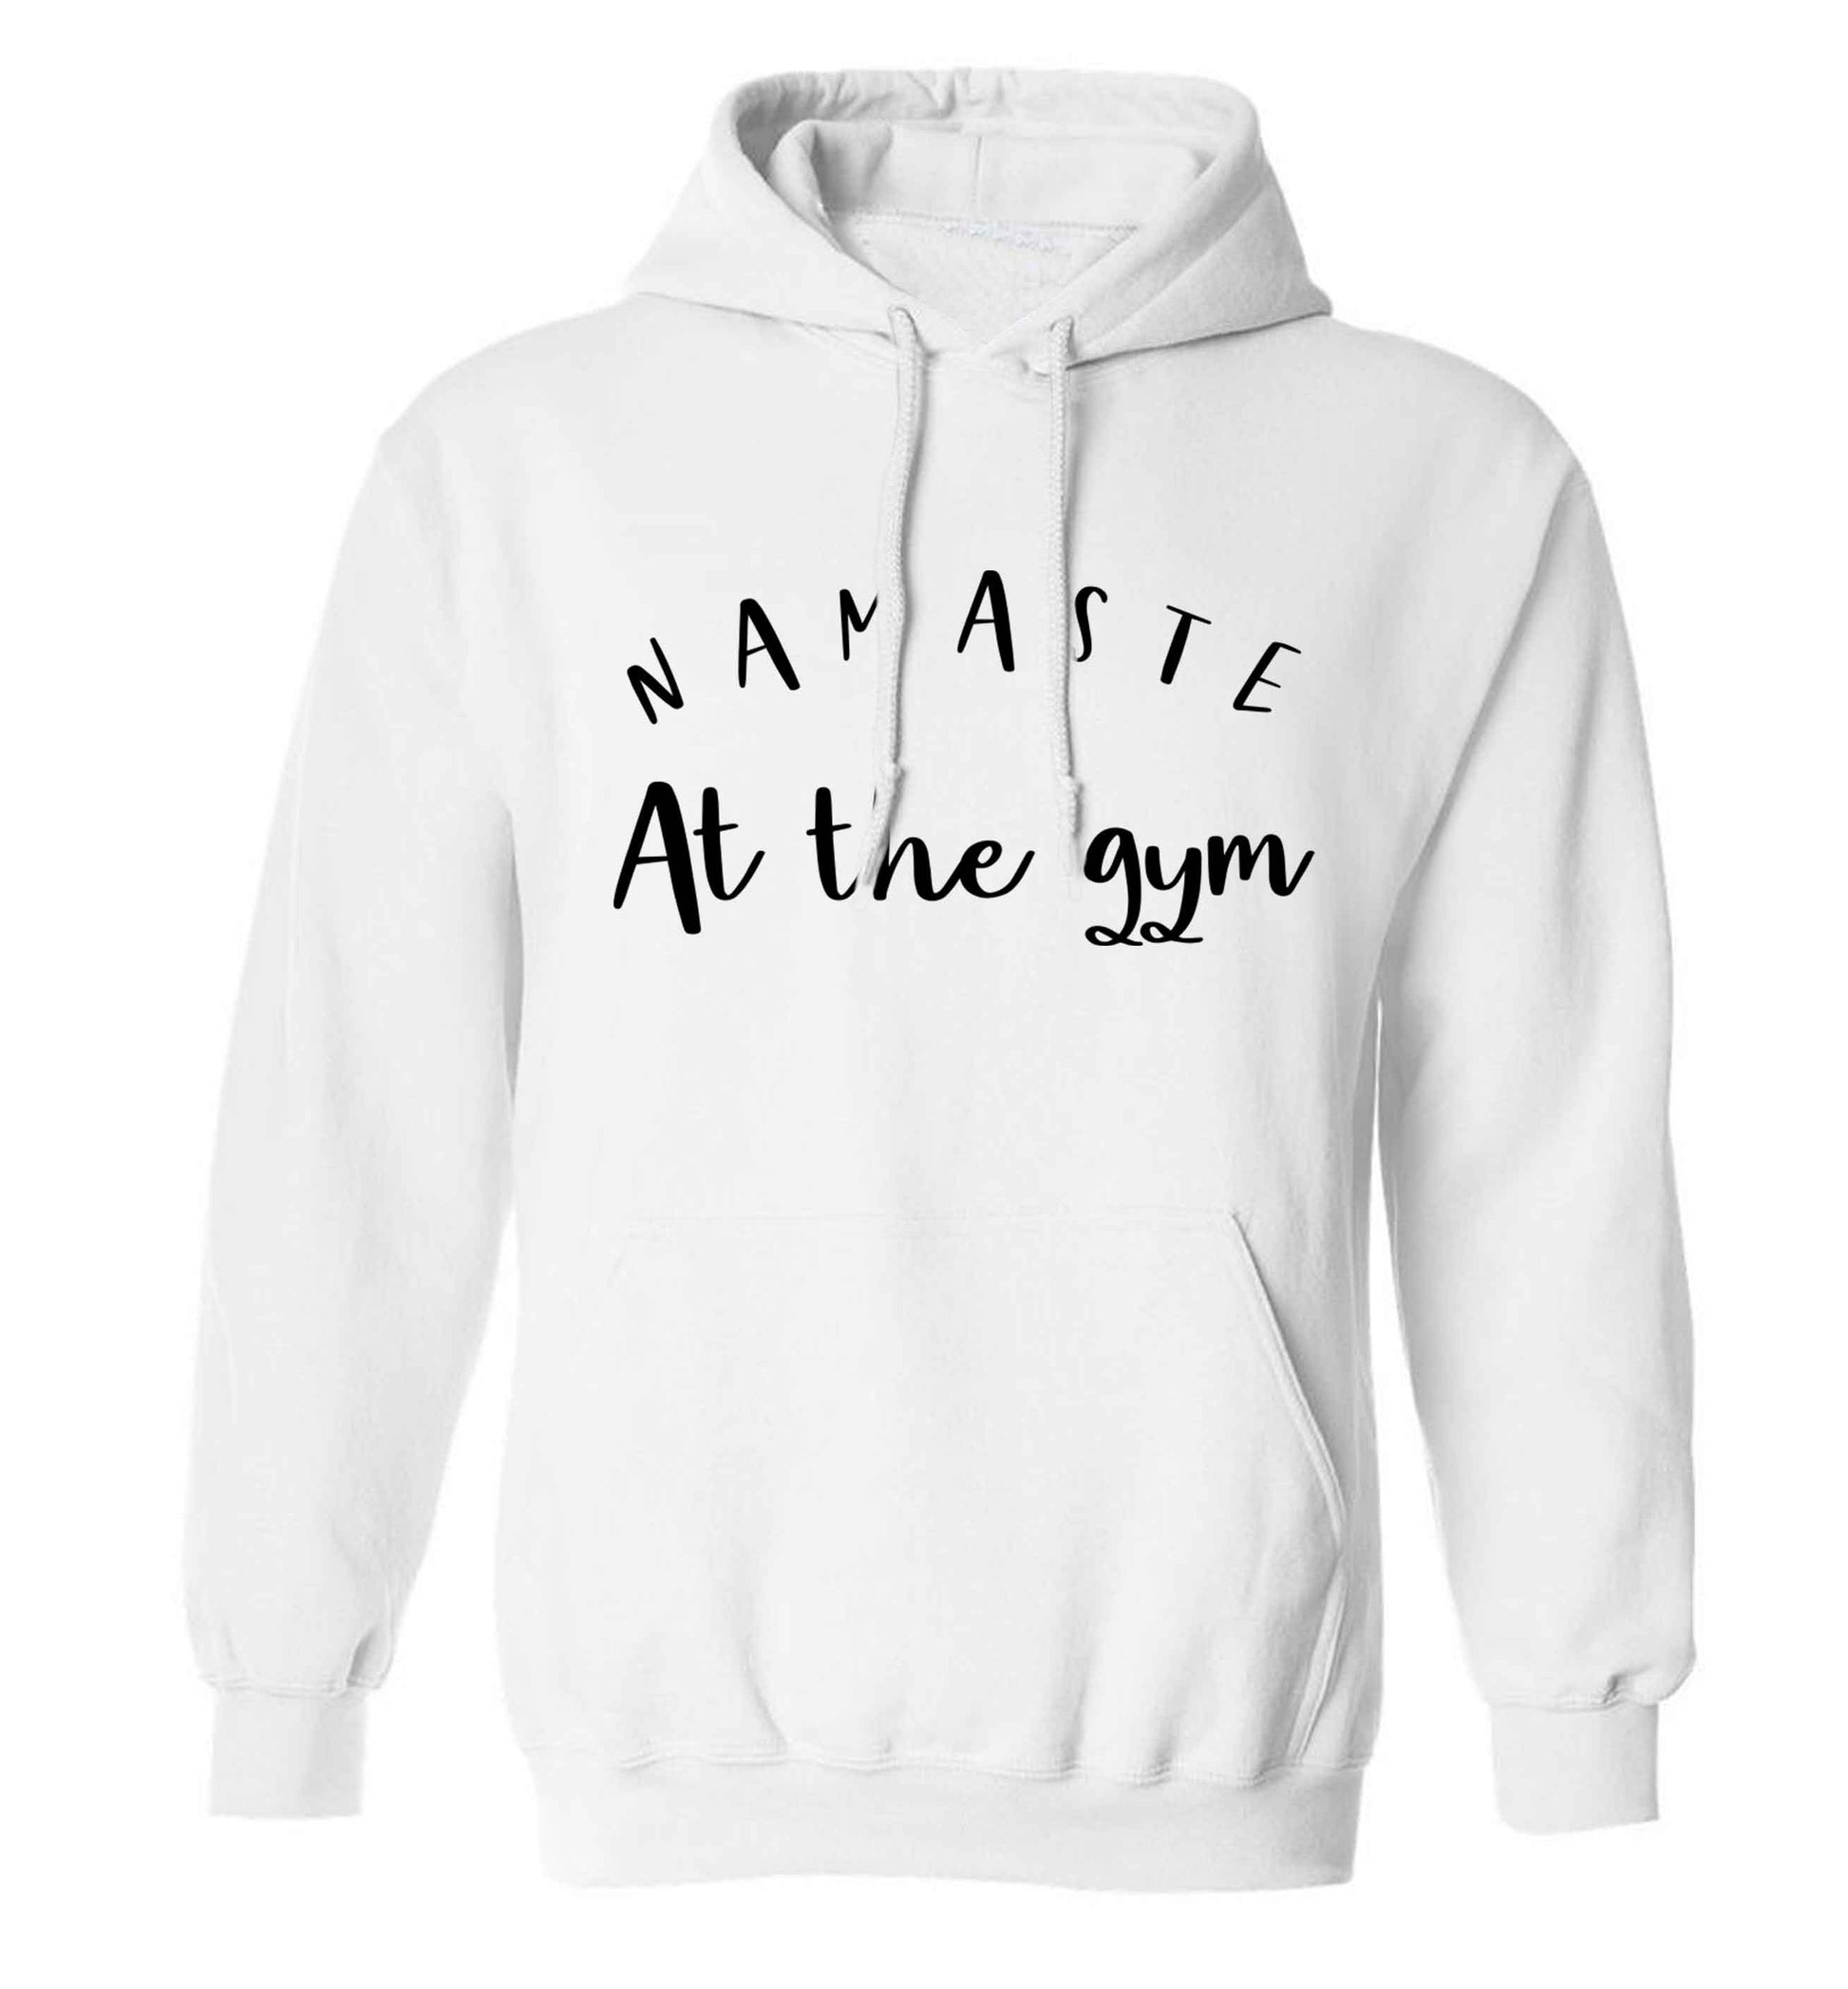 Namaste at the gym adults unisex white hoodie 2XL